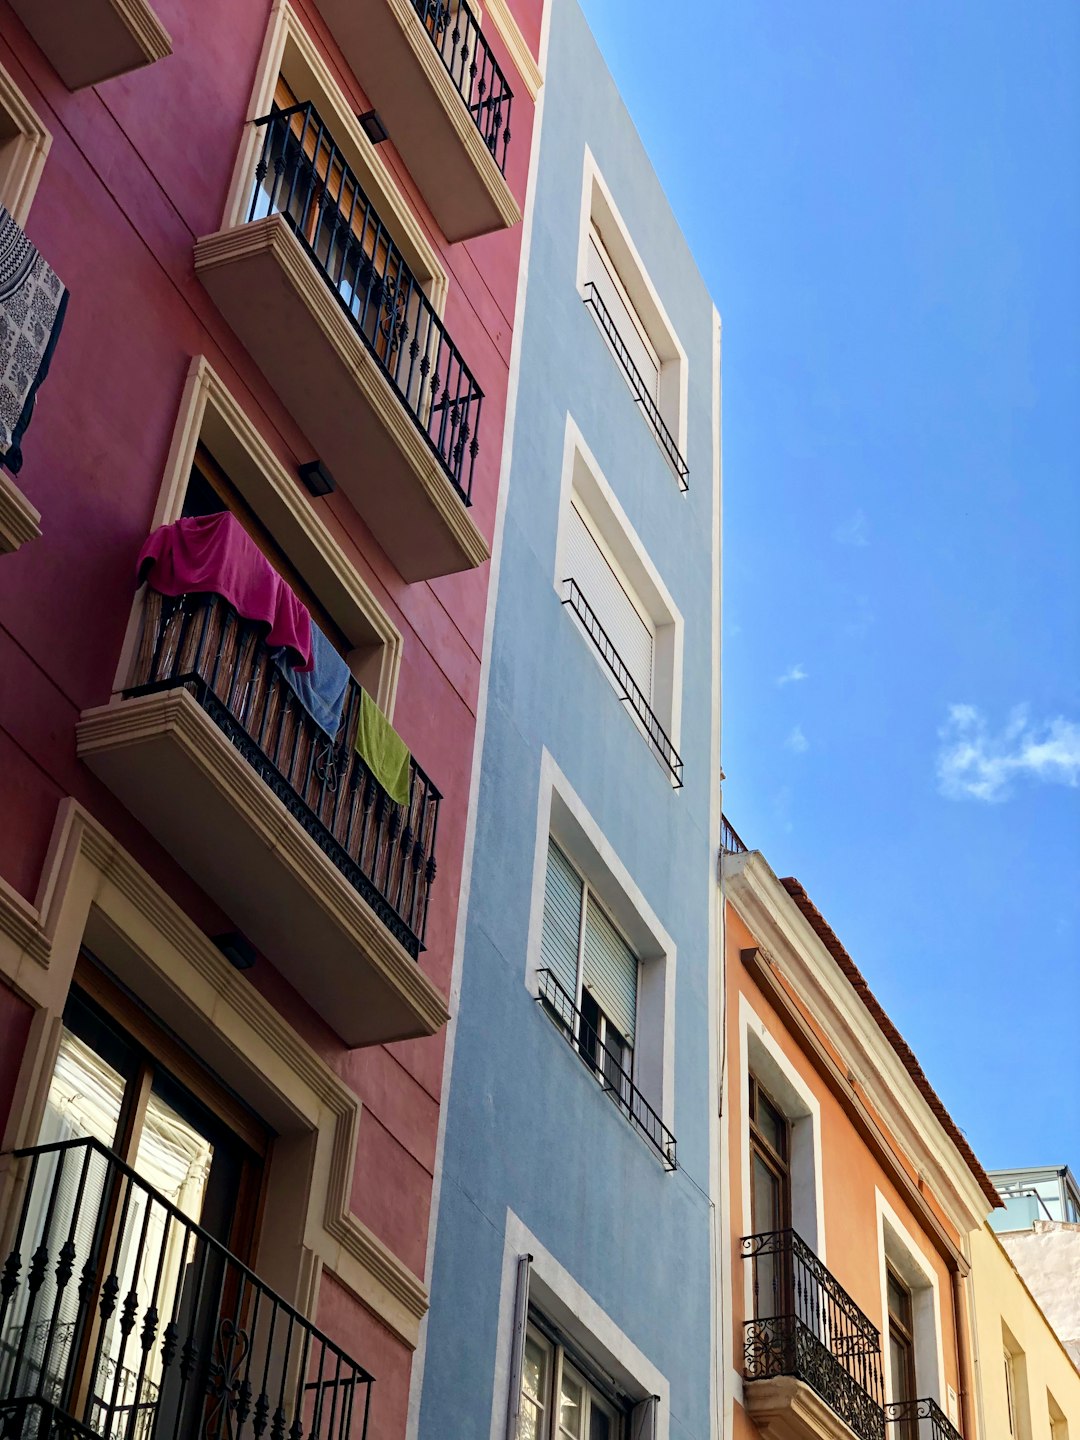 Travel Tips and Stories of Calle Mayor in Spain